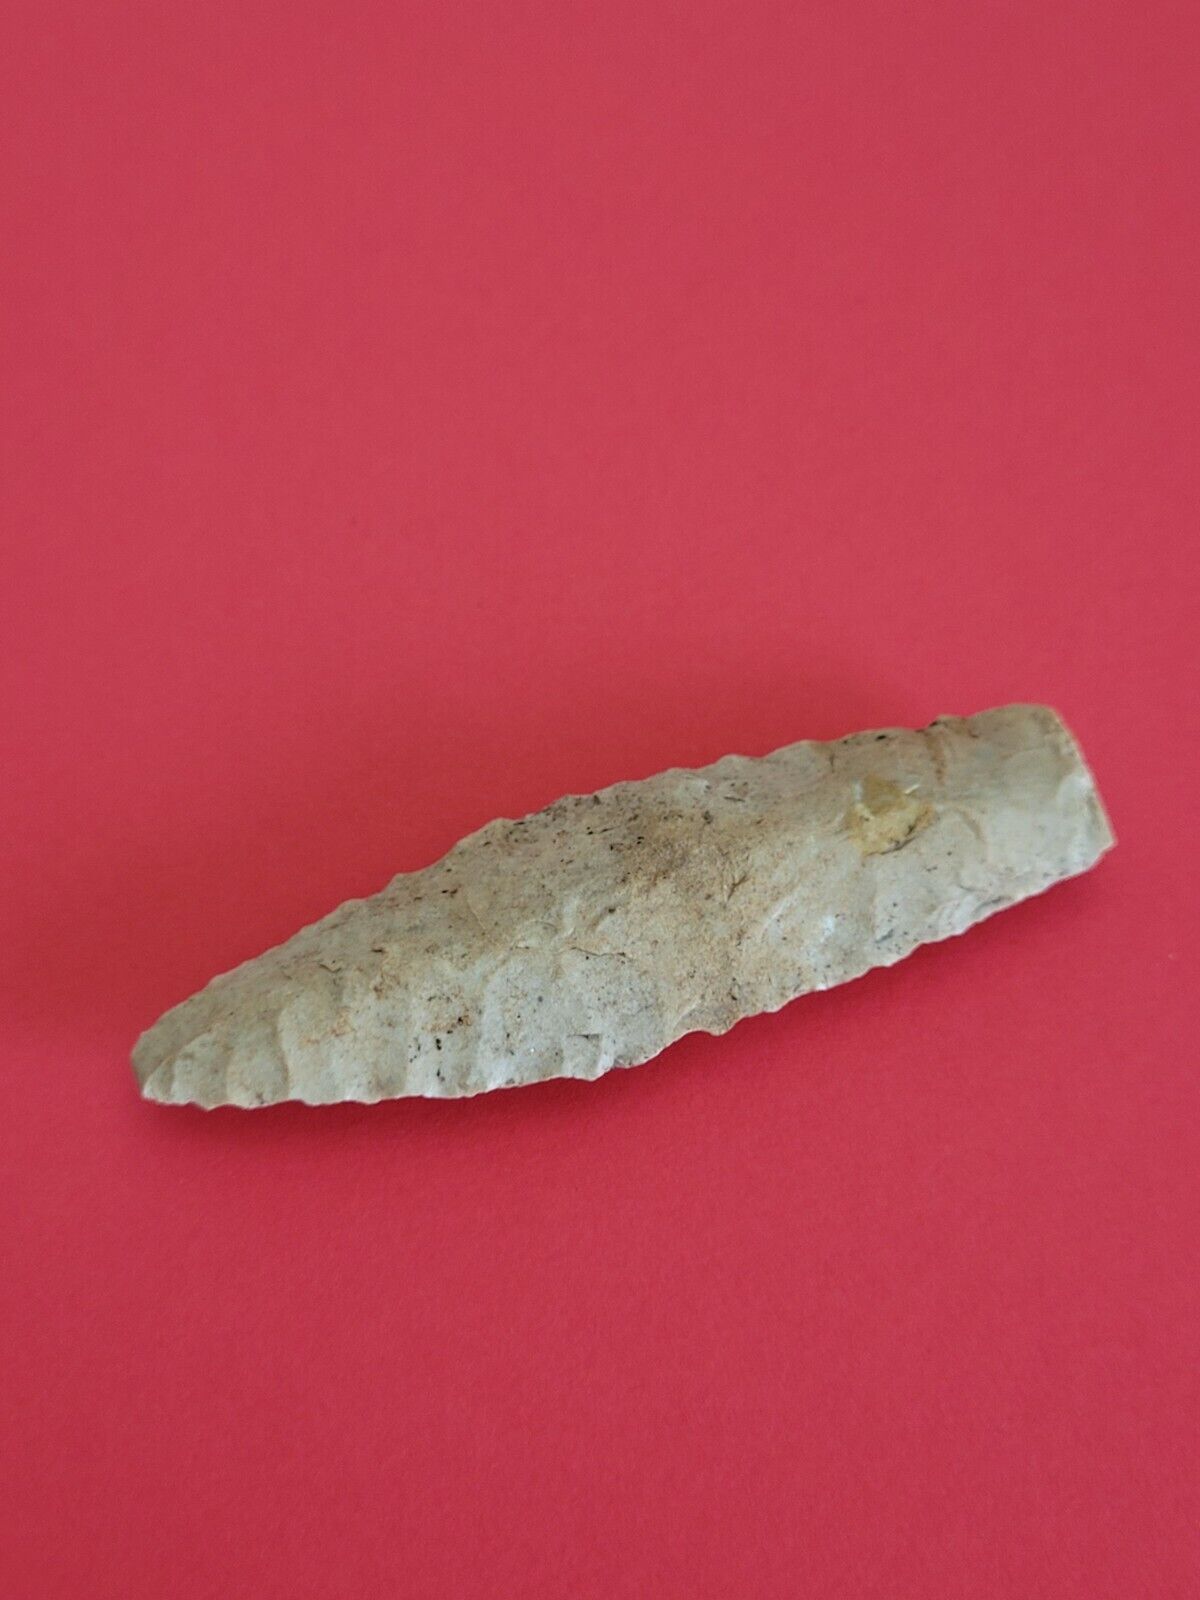 Authentic Ancient Native American Indian Arrowhead